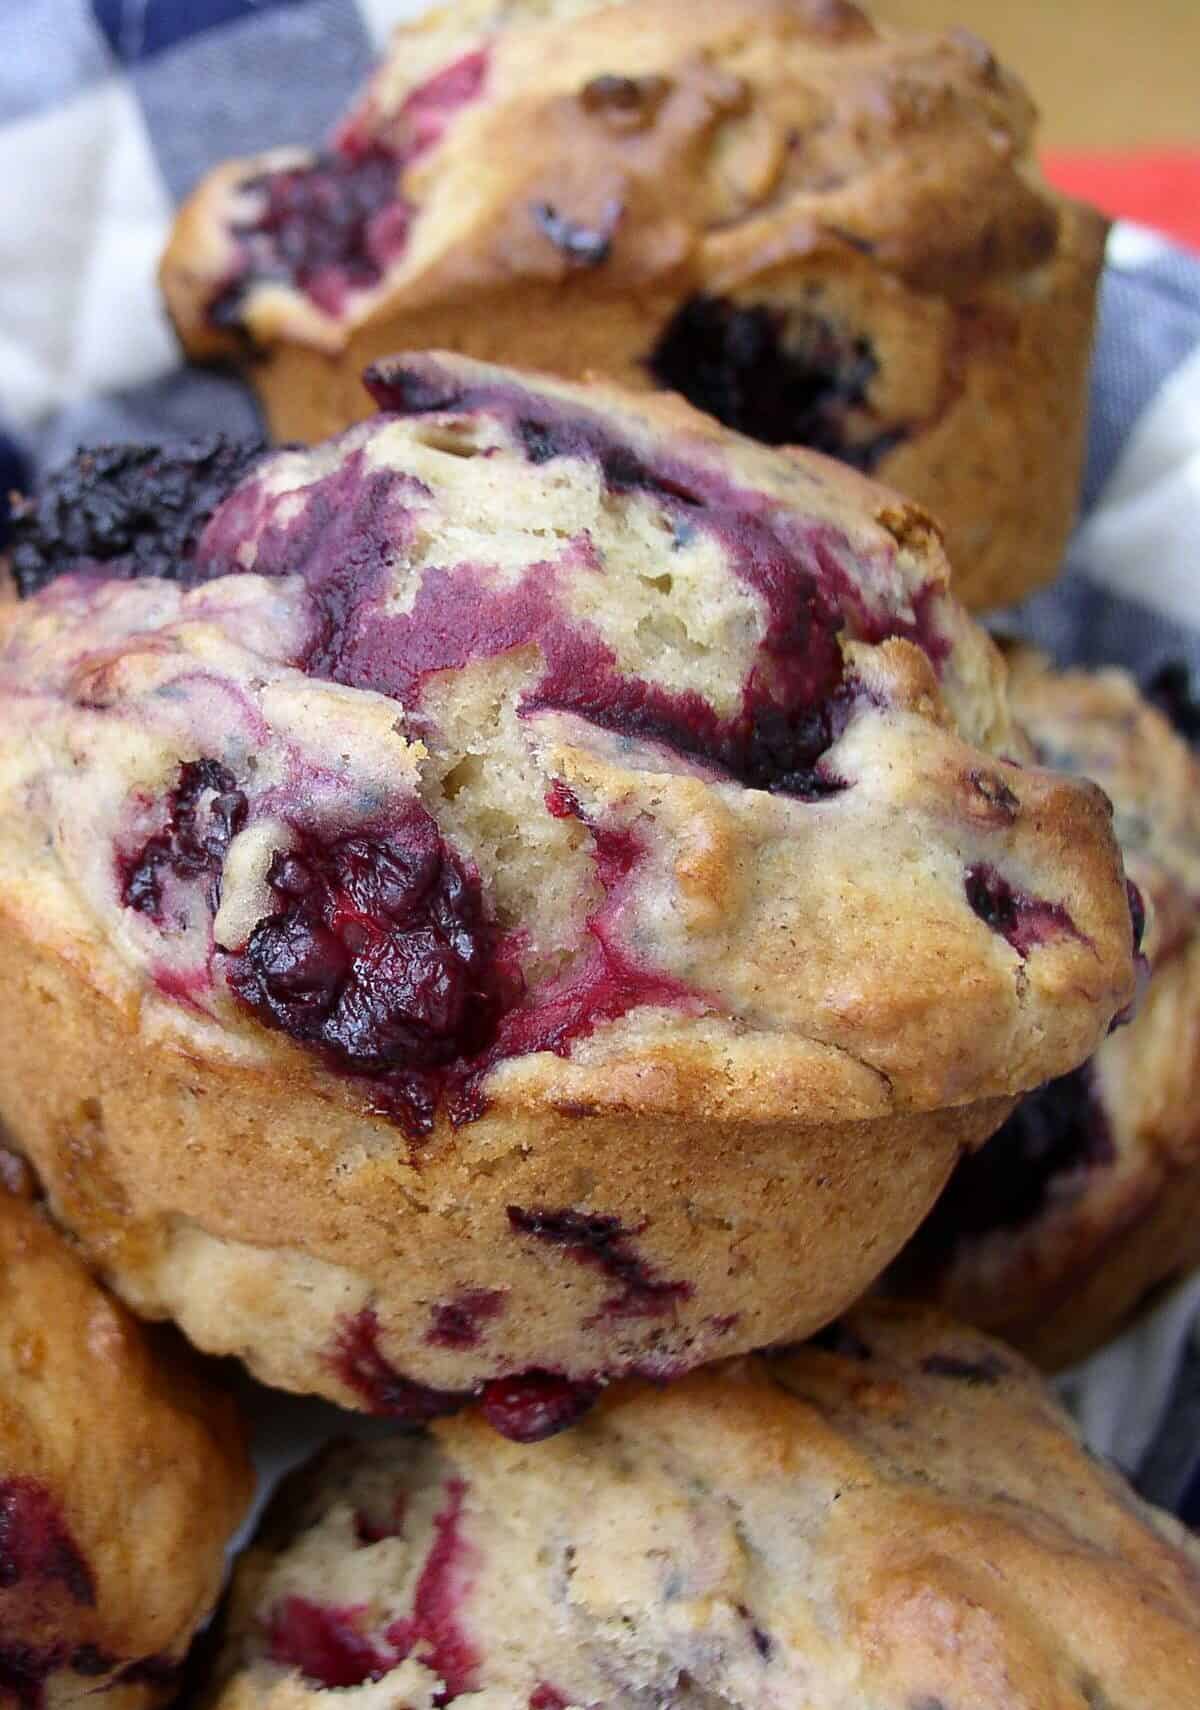   Sweet, ripe bananas and juicy berries create the perfect muffin couple!